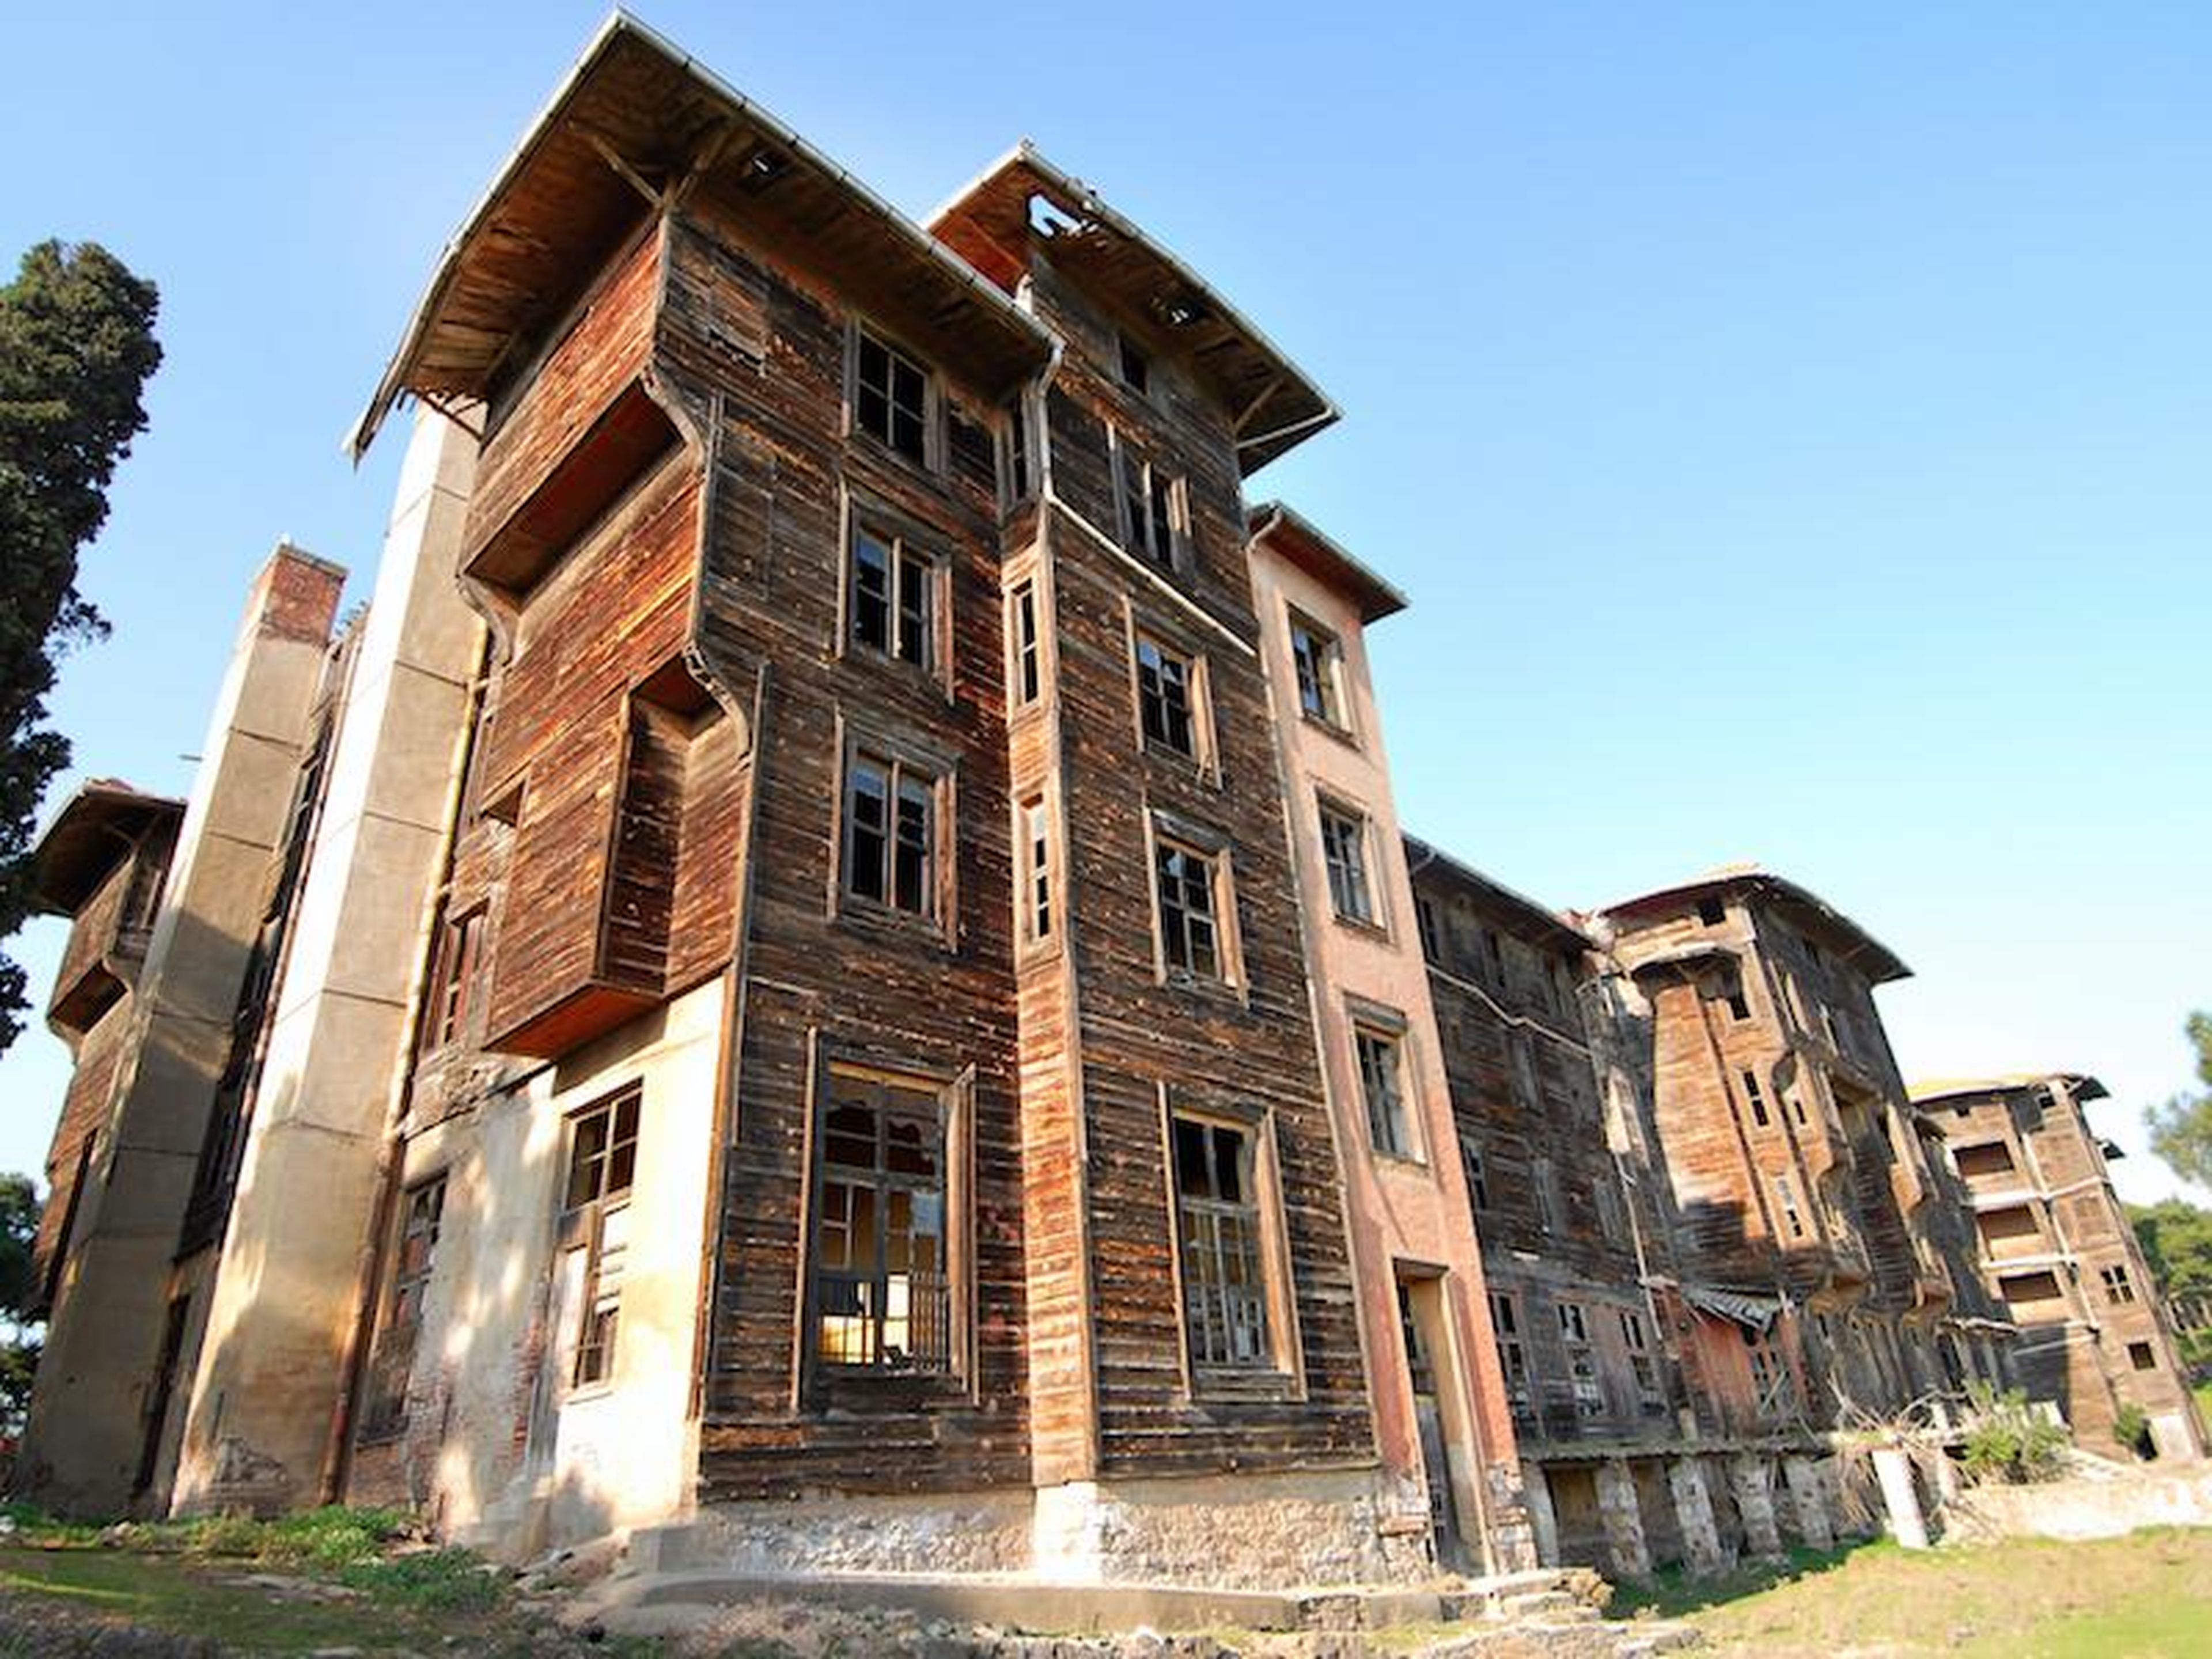 Despite being made of wood, Rum Orphanage in Turkey still stands today.